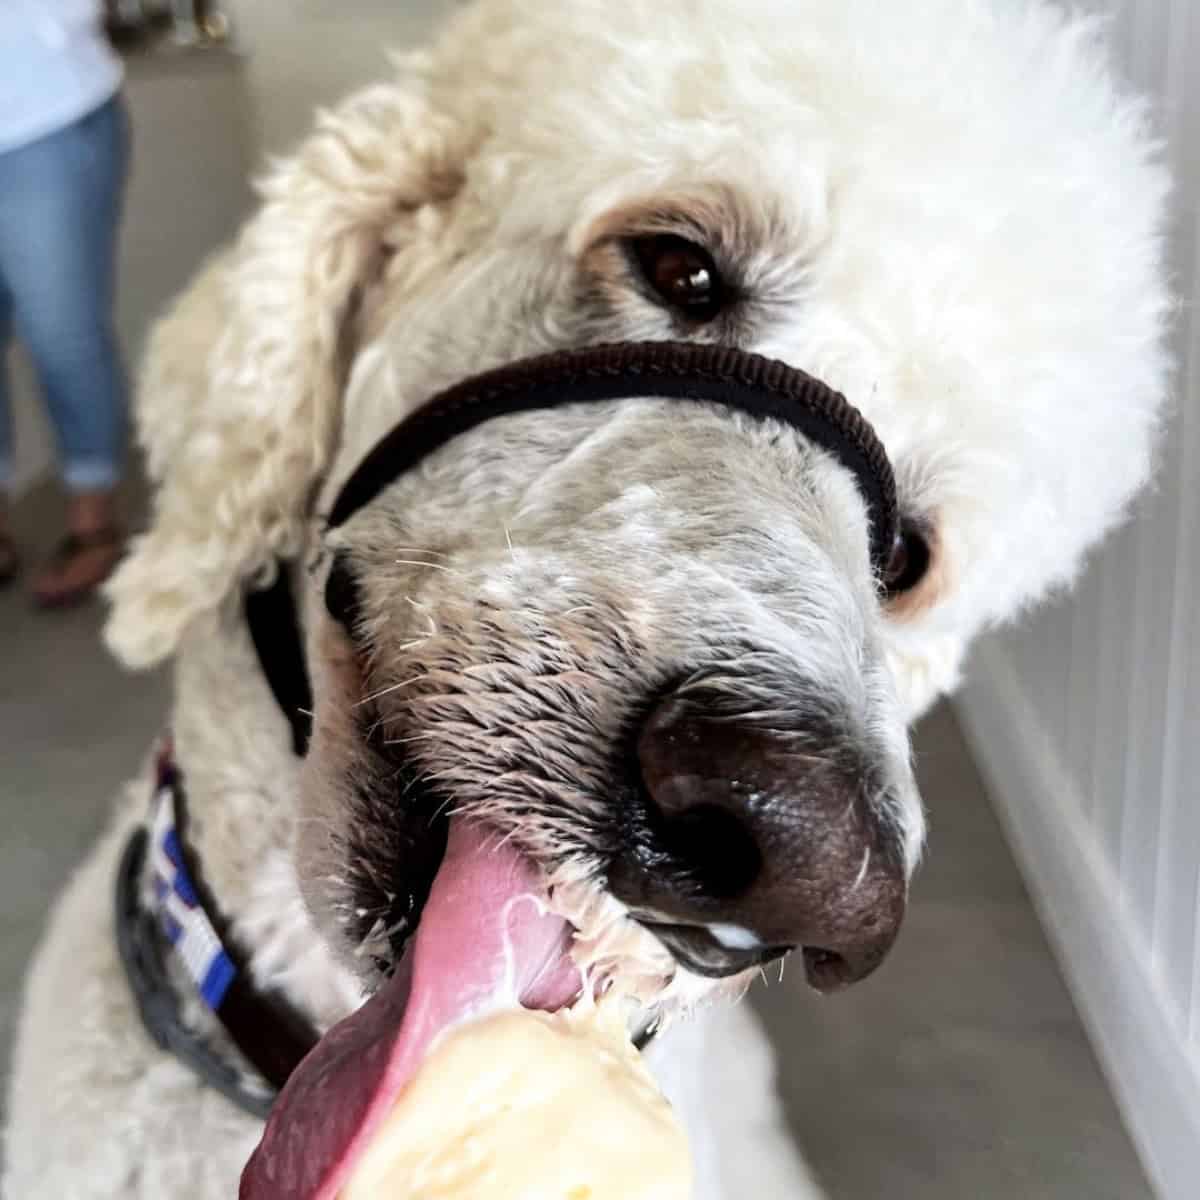 Poodle eating ice cream